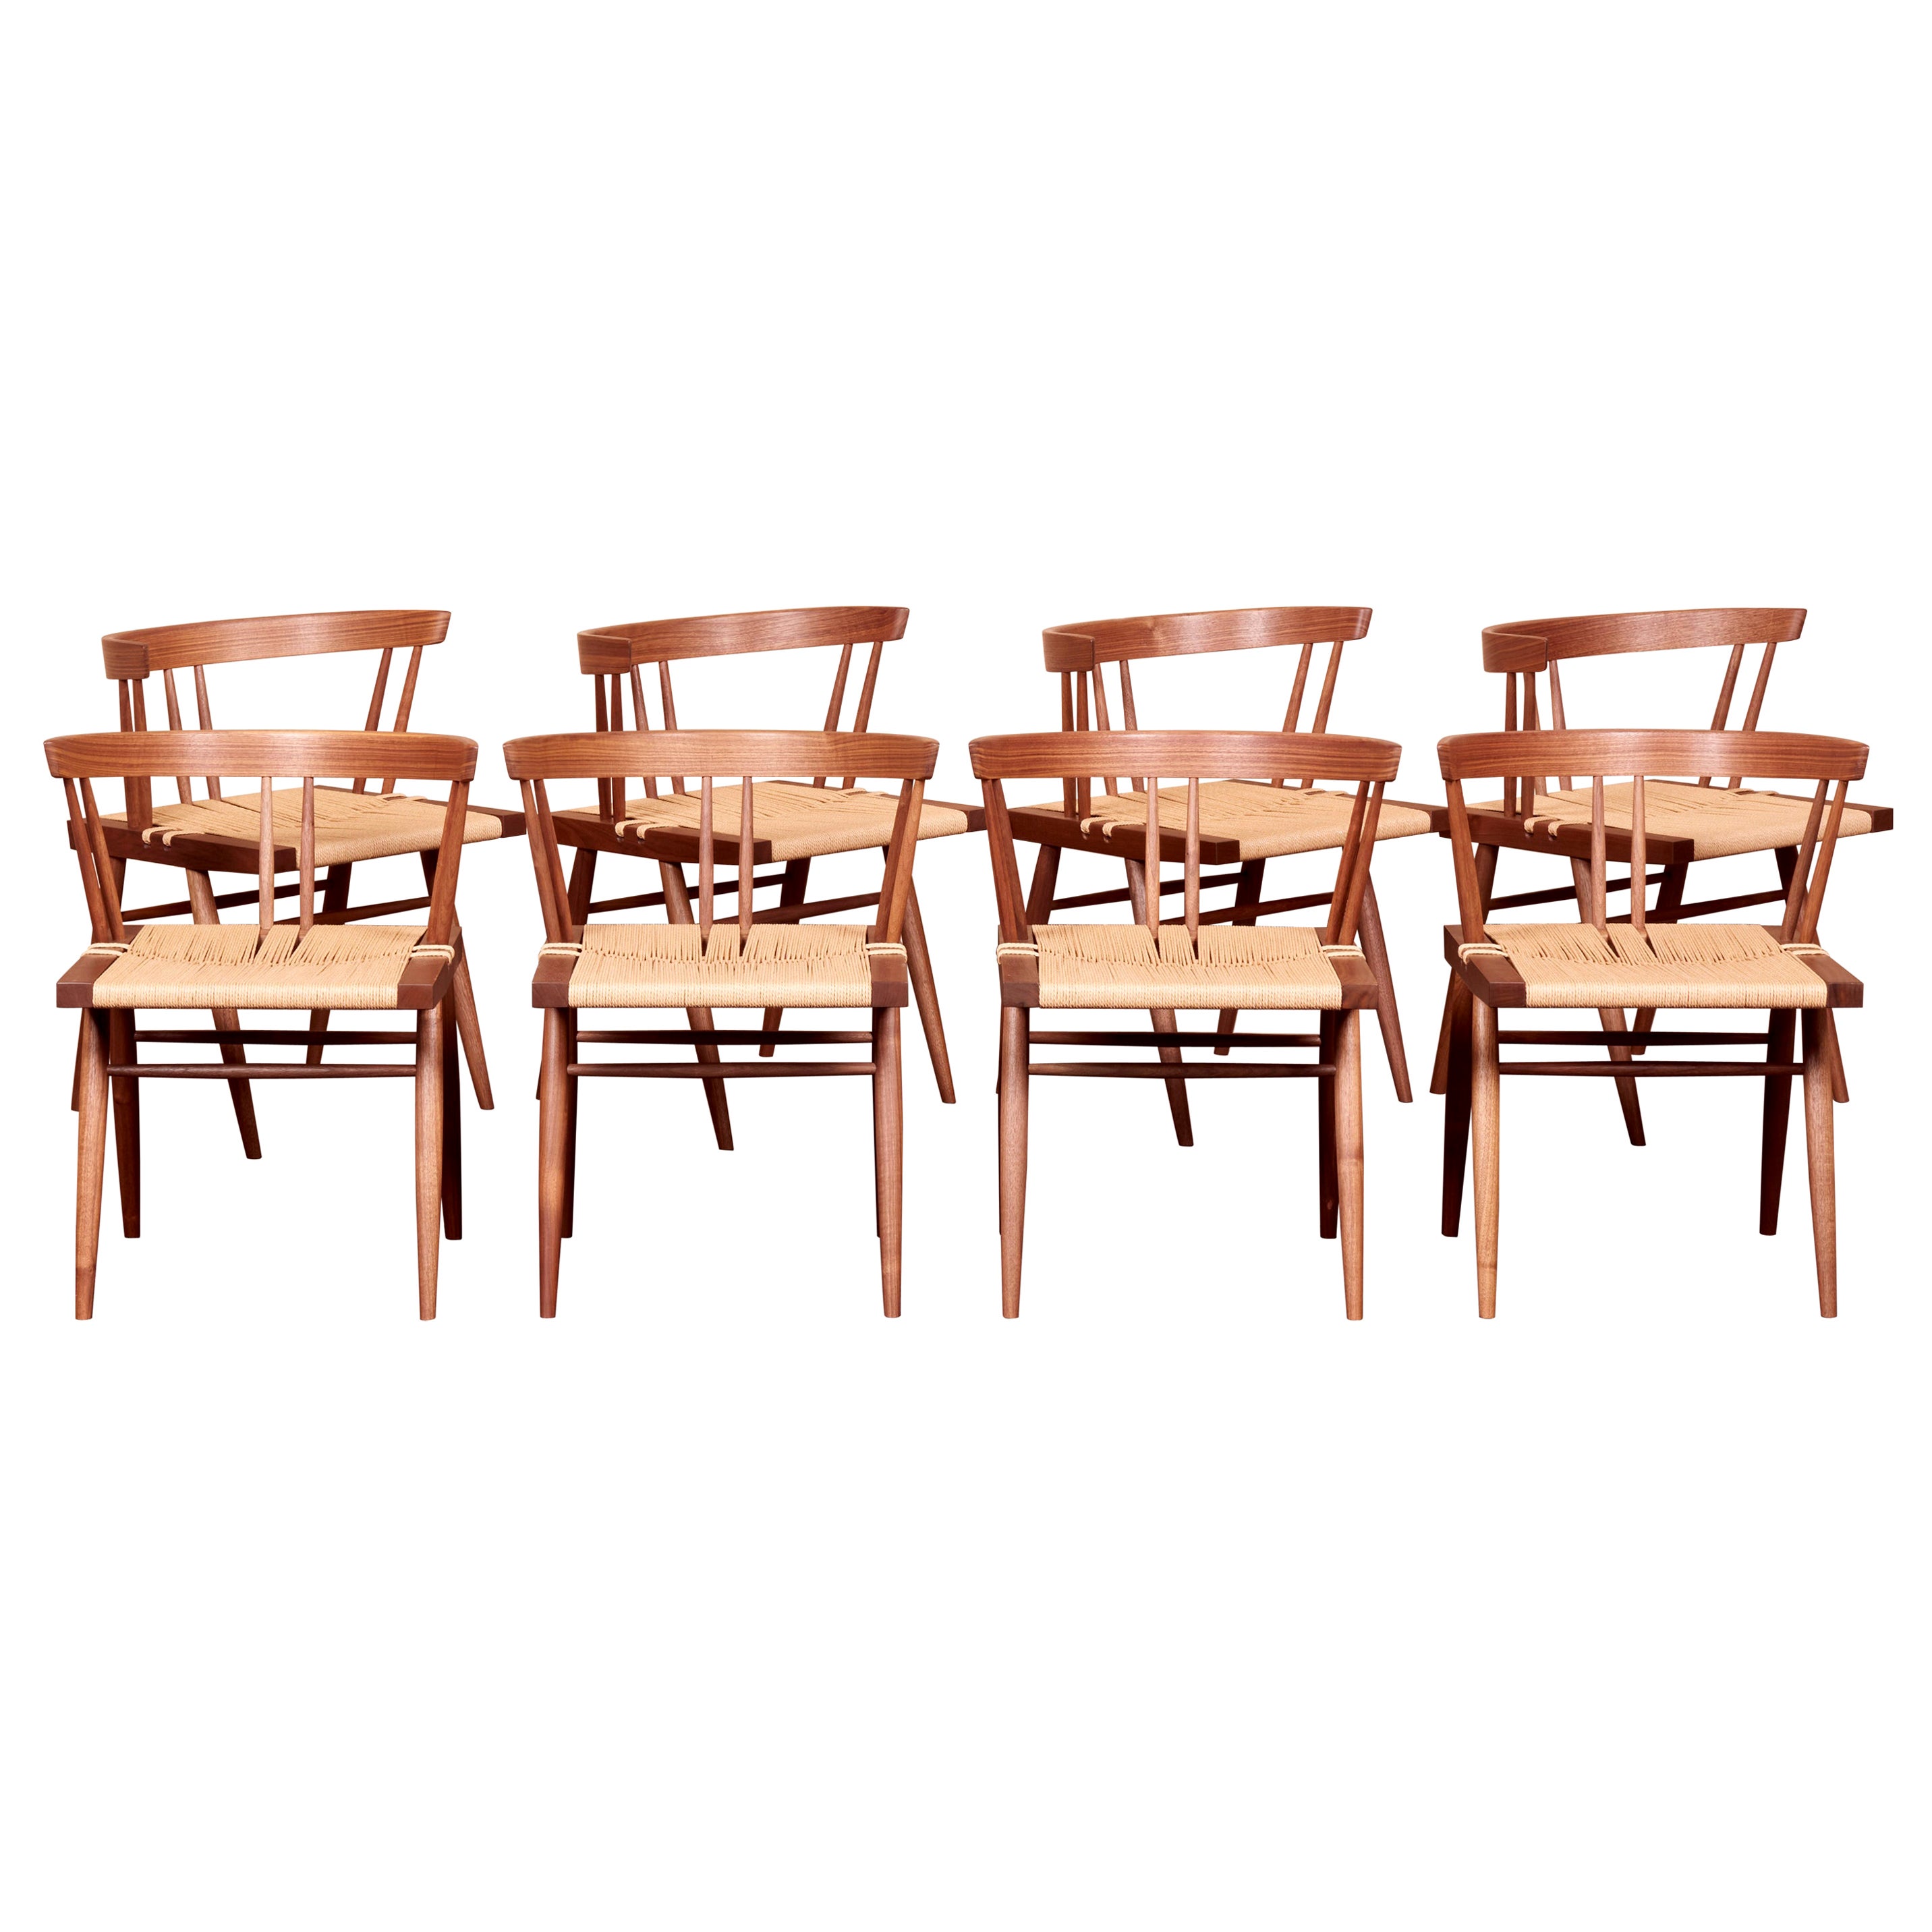 8 Grass Seated Dining Chairs by Mira Nakashima based on a G. Nakashima design For Sale